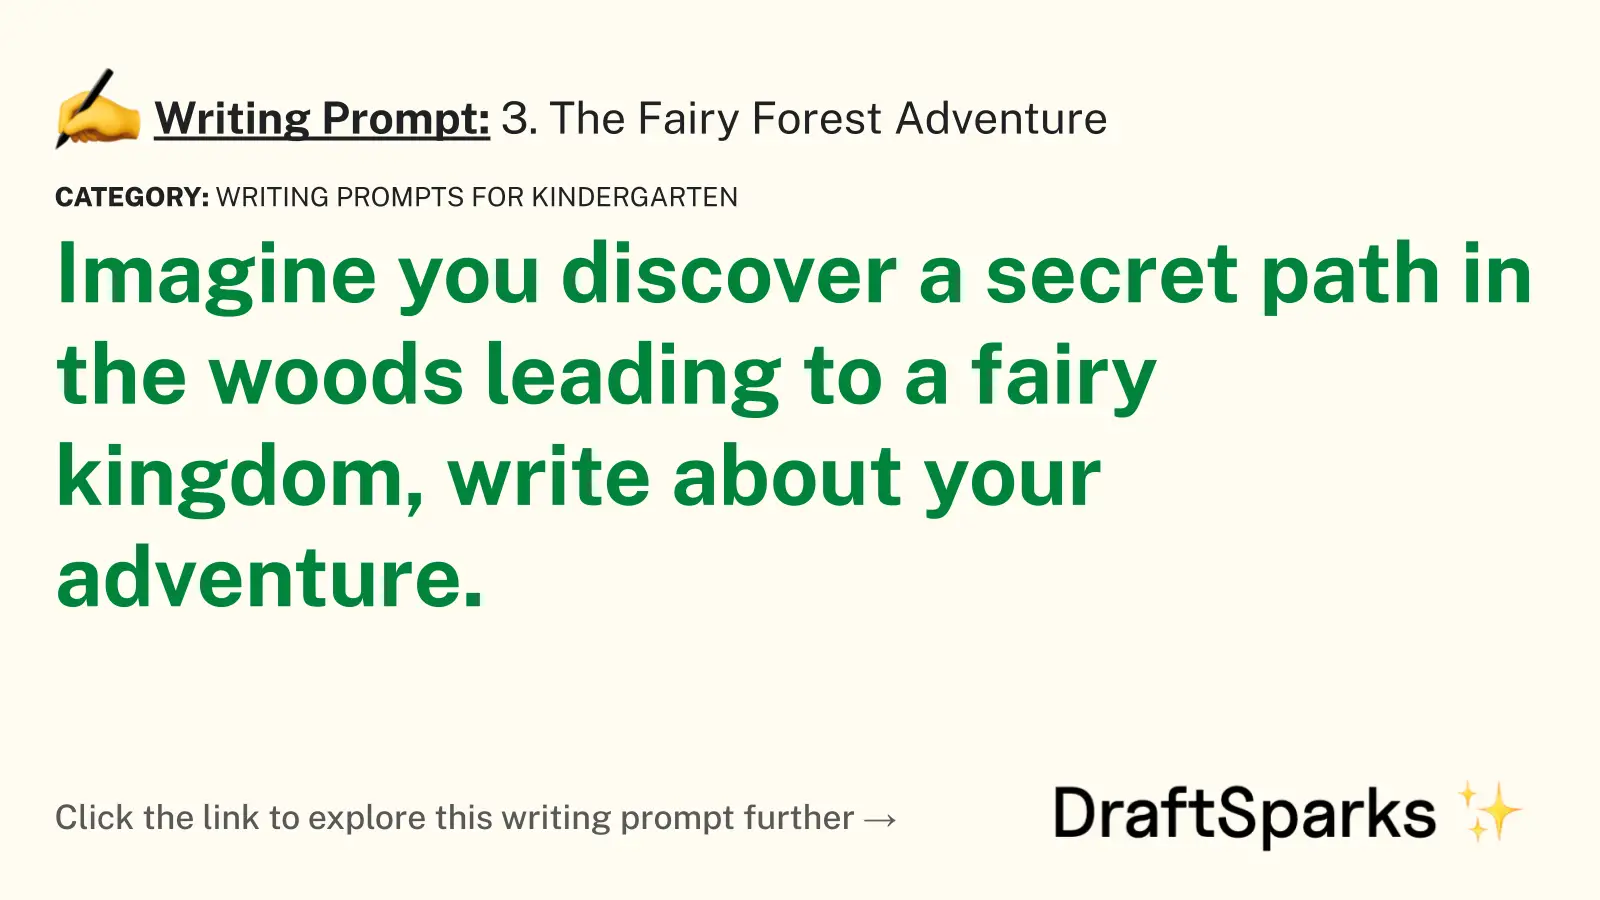 3. The Fairy Forest Adventure